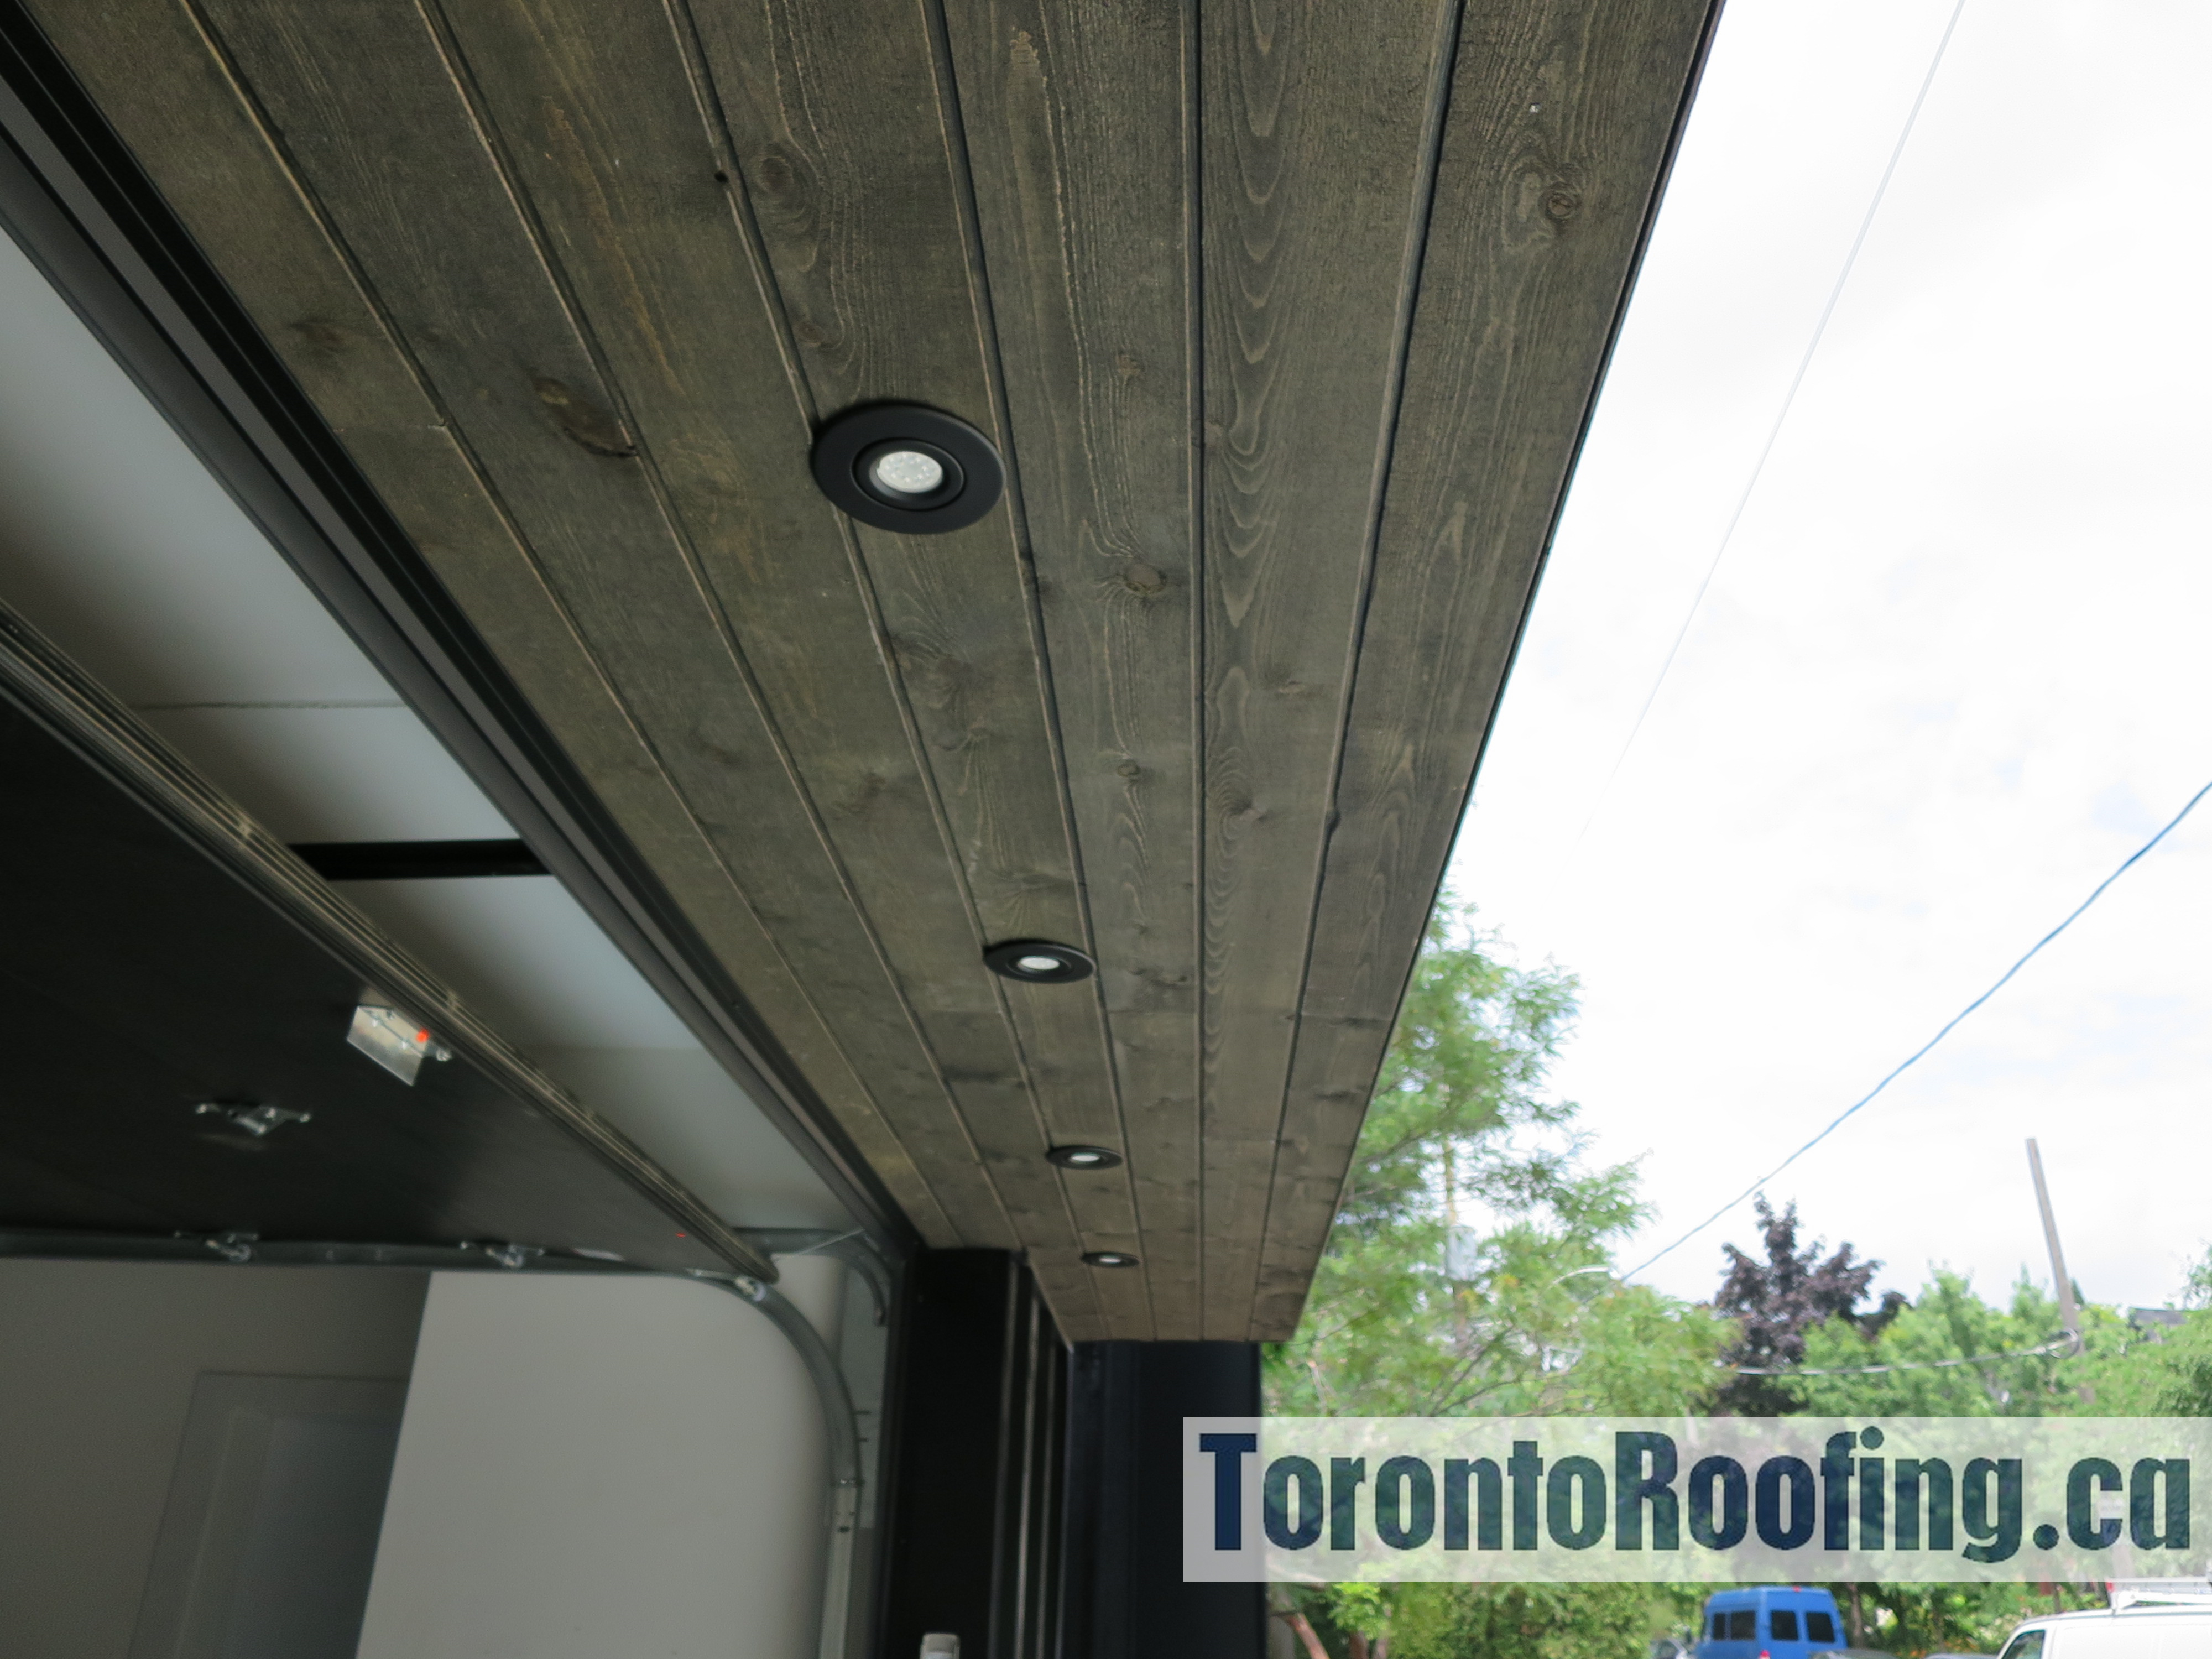 toronto-roofing-roof-siding-metal-copper-wood-modern-homes-aluminum-cladding-architeture-building-contractor-exterior-14